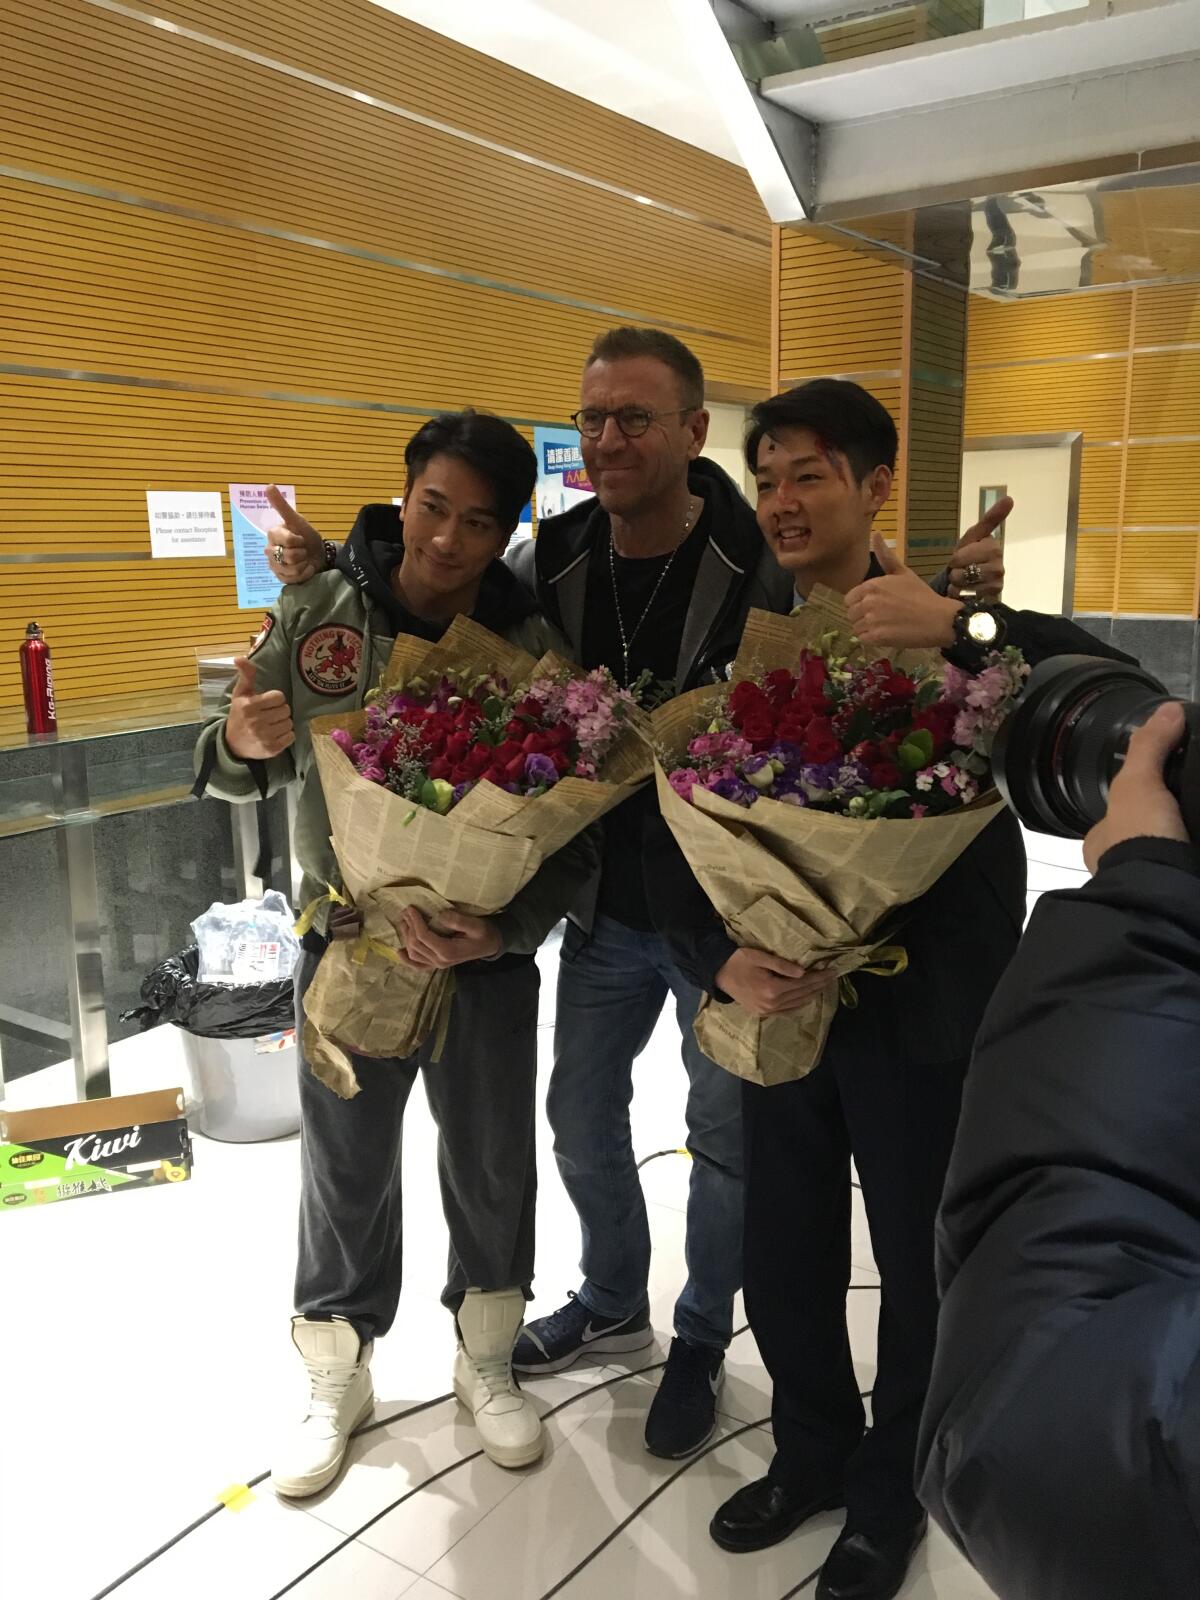 Director Renny Harlin congratulates two actors who had finished filming on his 2019 Chinese action thriller "Bodies at Rest."